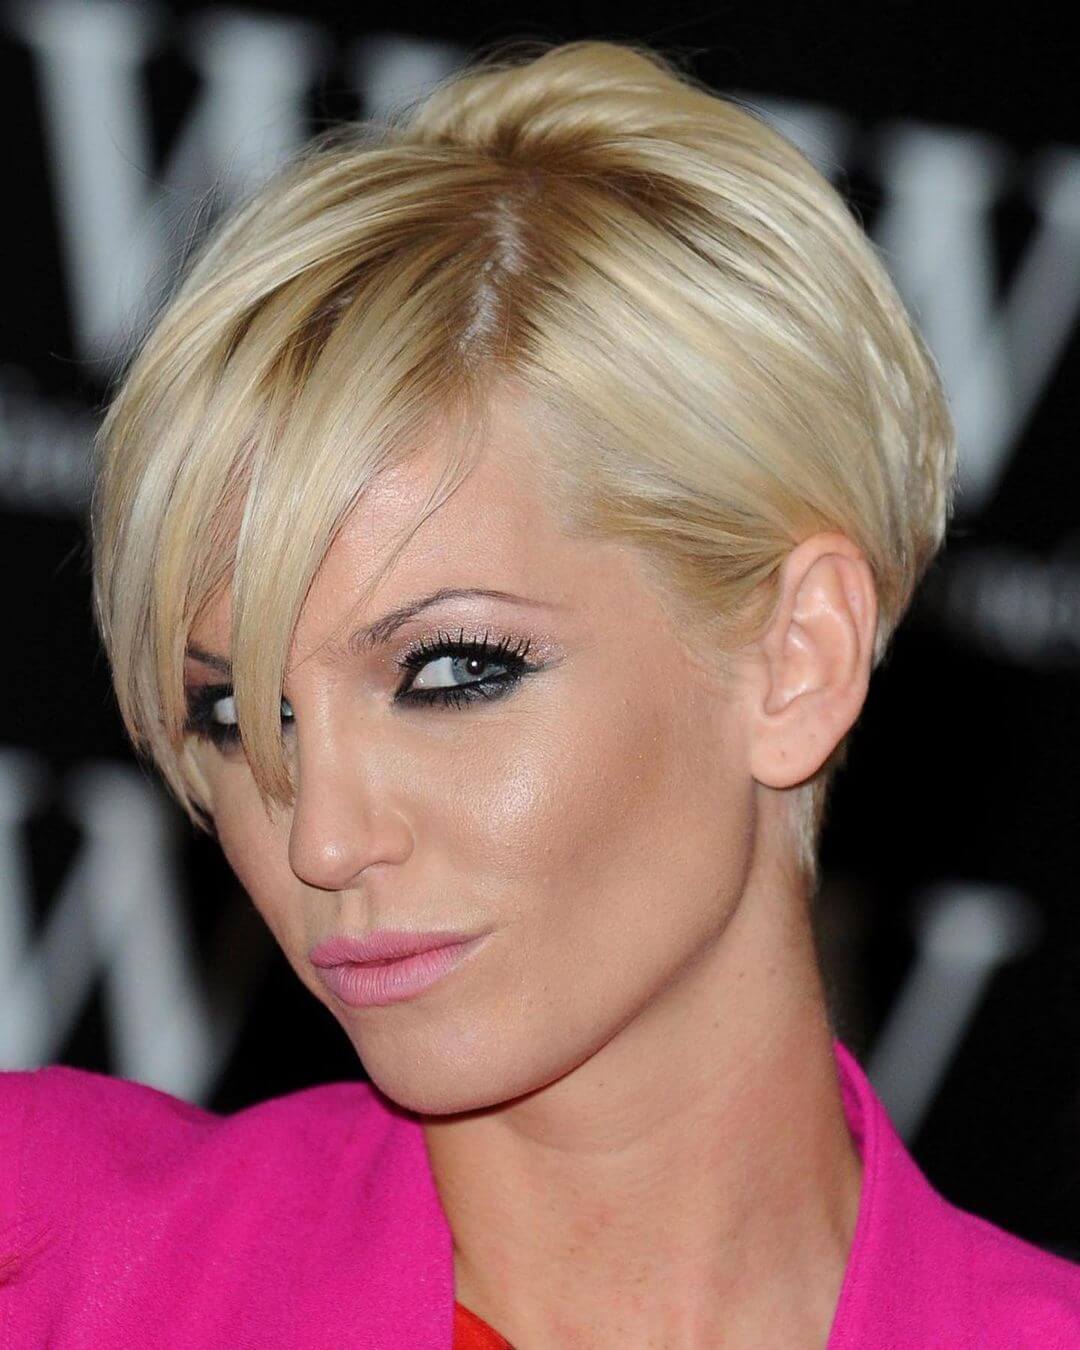 Ear Length Hairstyle for Women Angled undercut hairstyle